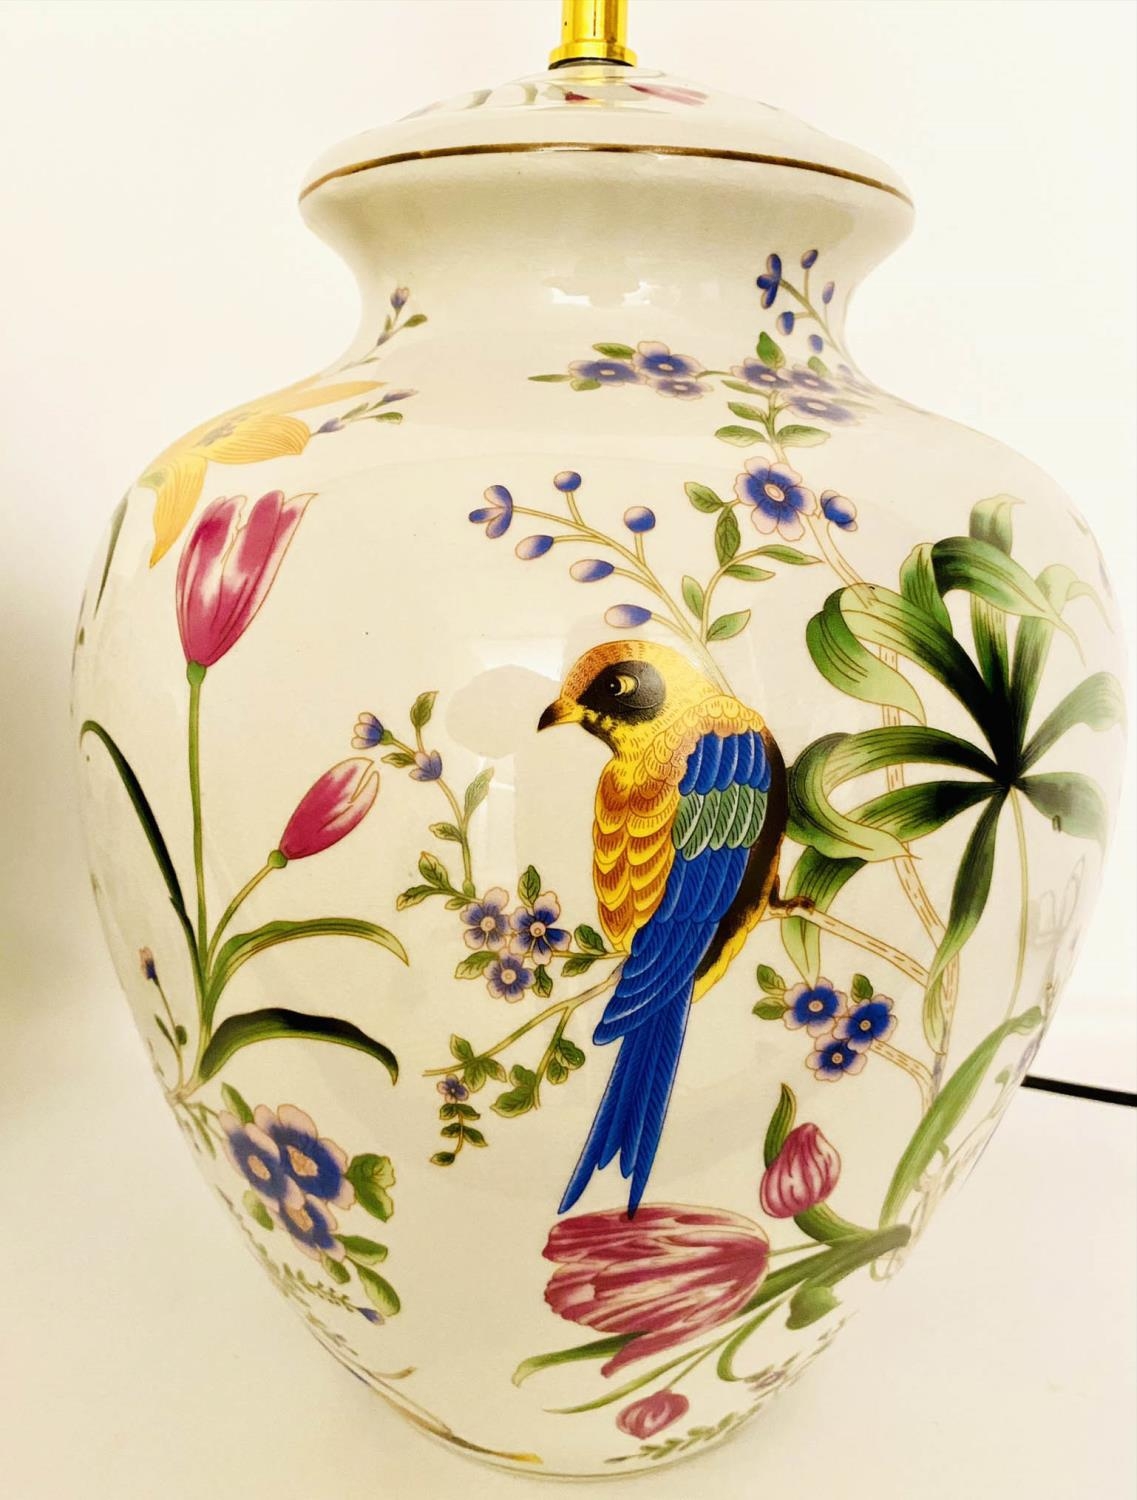 TABLE LAMPS, a pair, 46cm high, 27cm diameter, glazed ceramic with floral design with birds. (2) - Image 3 of 4